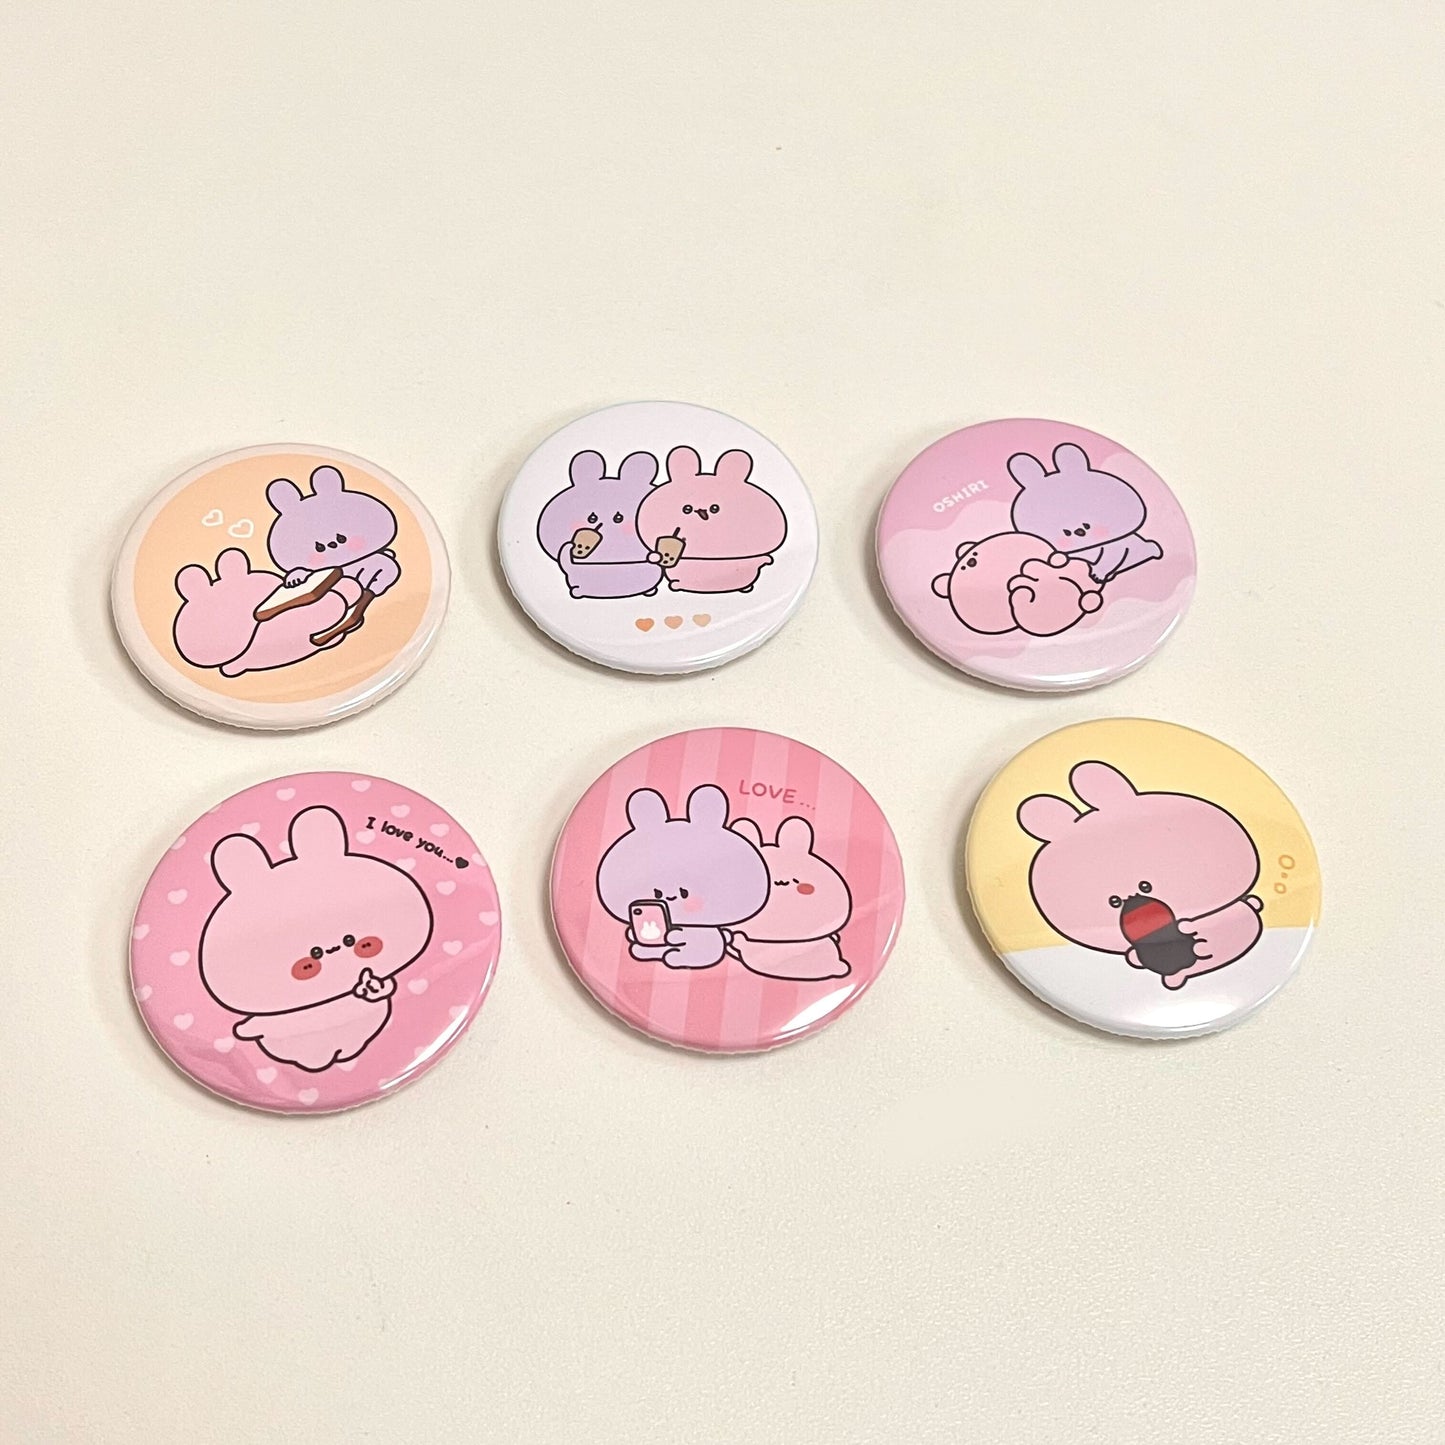 [Asamimi-chan] Random can badge complete set (6 types in total) (Asamimi-chan popular scene Yoseatsume series) [Shipped in mid-February]